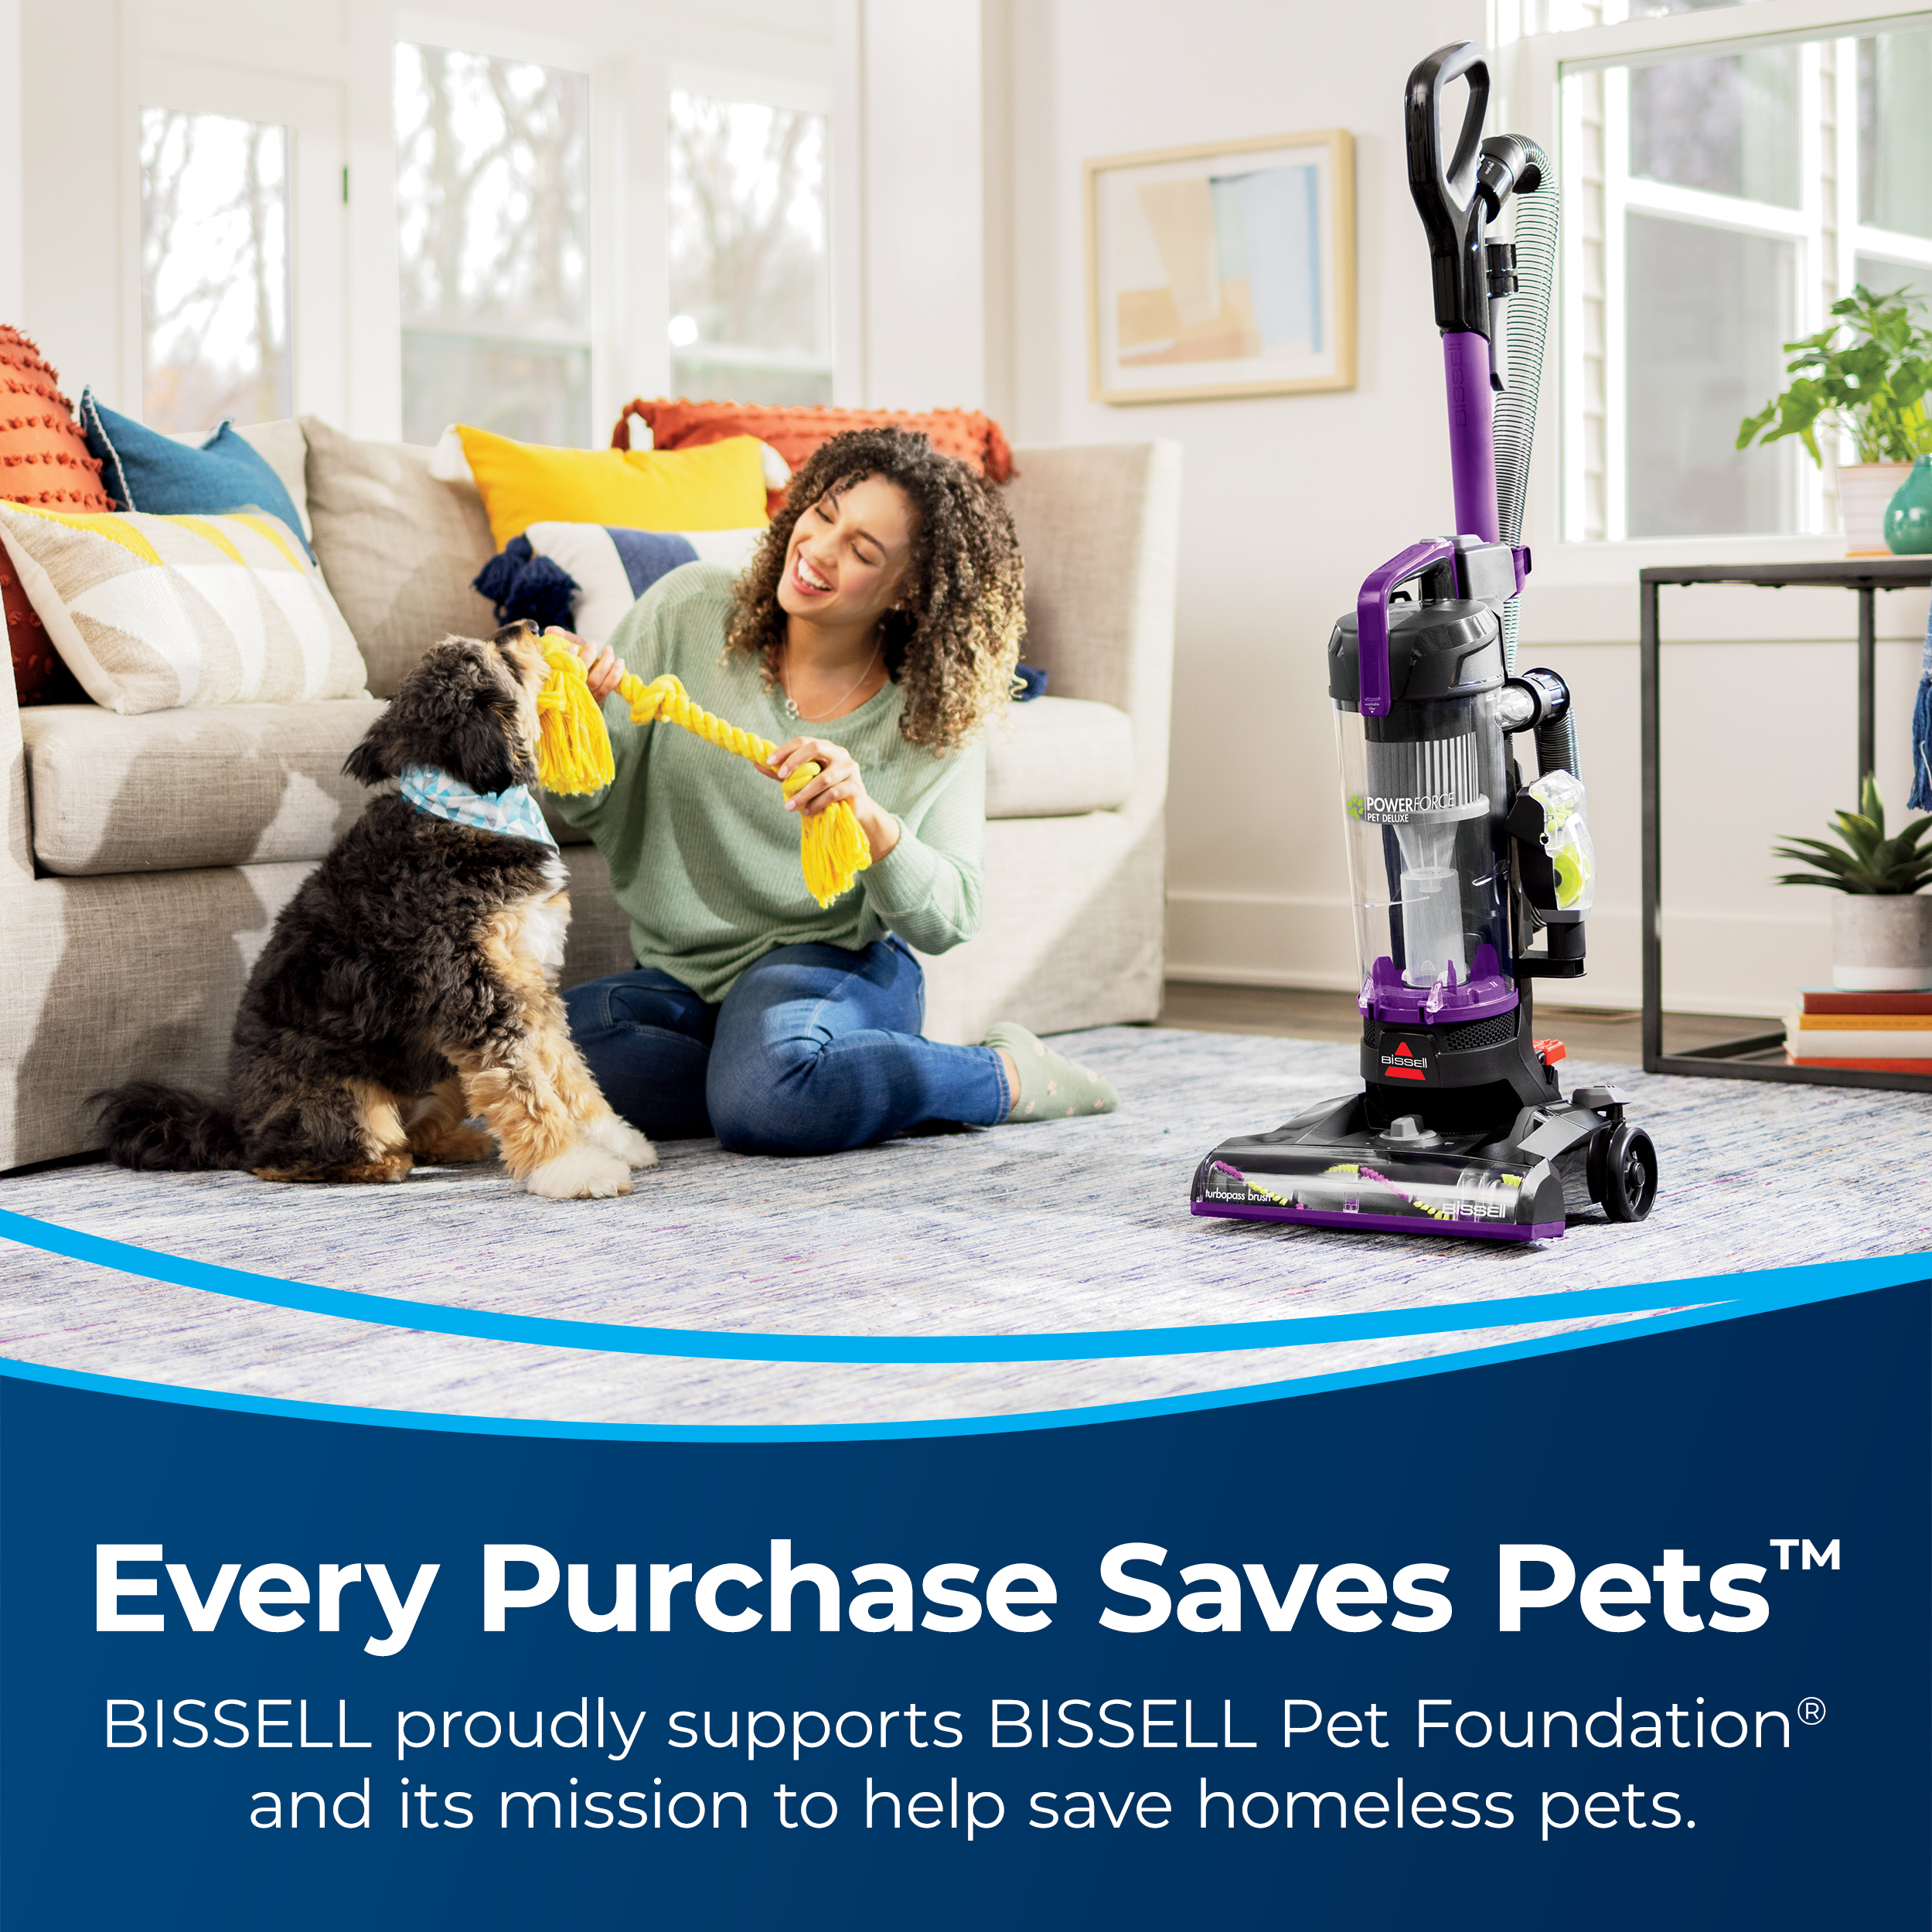 BISSELL Power Force Helix Pet Deluxe Bagless Upright Vacuum with Live Wand 3334 - image 2 of 7